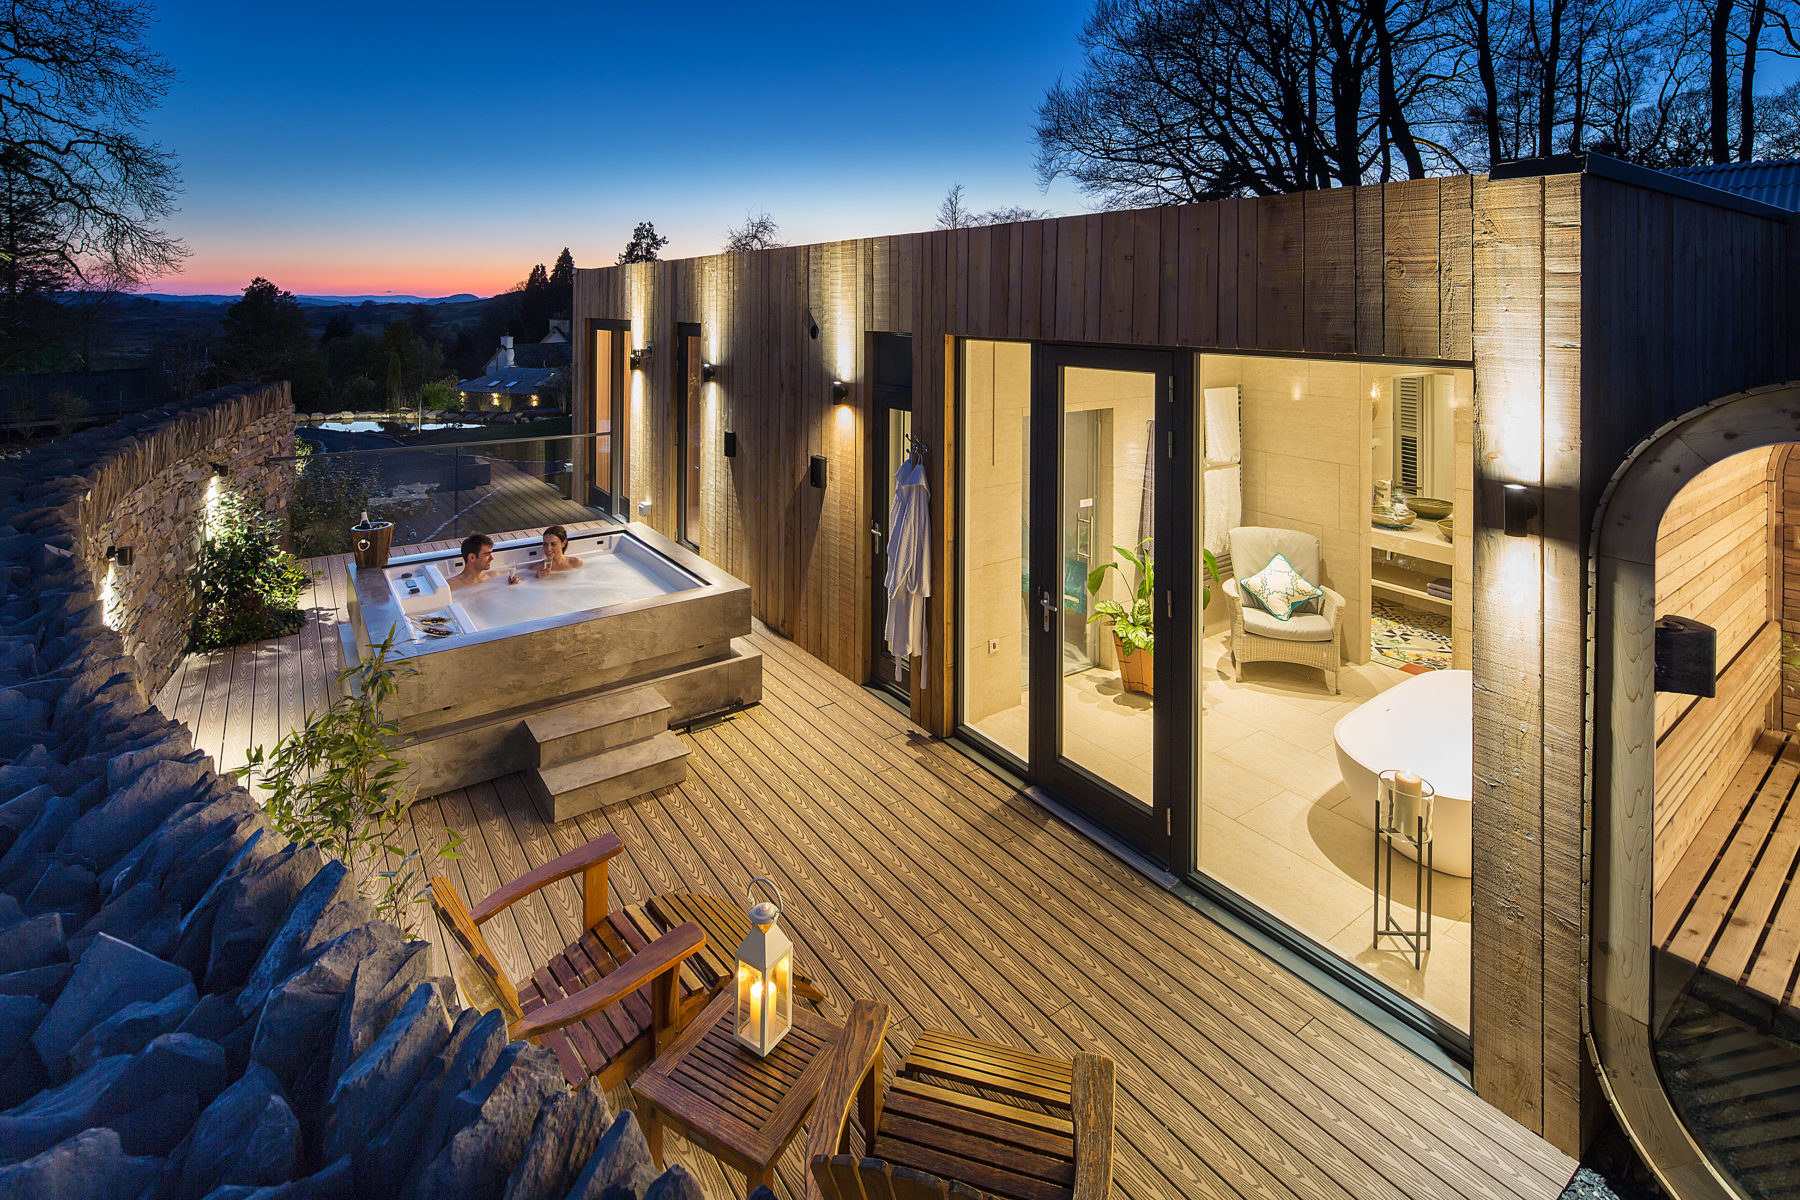 LUXURIA LIFESTYLE'S KAYA CHESHIRE REVIEWS THE STUNNING GILPIN HOTEL AND LAKE HOUSE – WINDERMERE, CUMBRIA